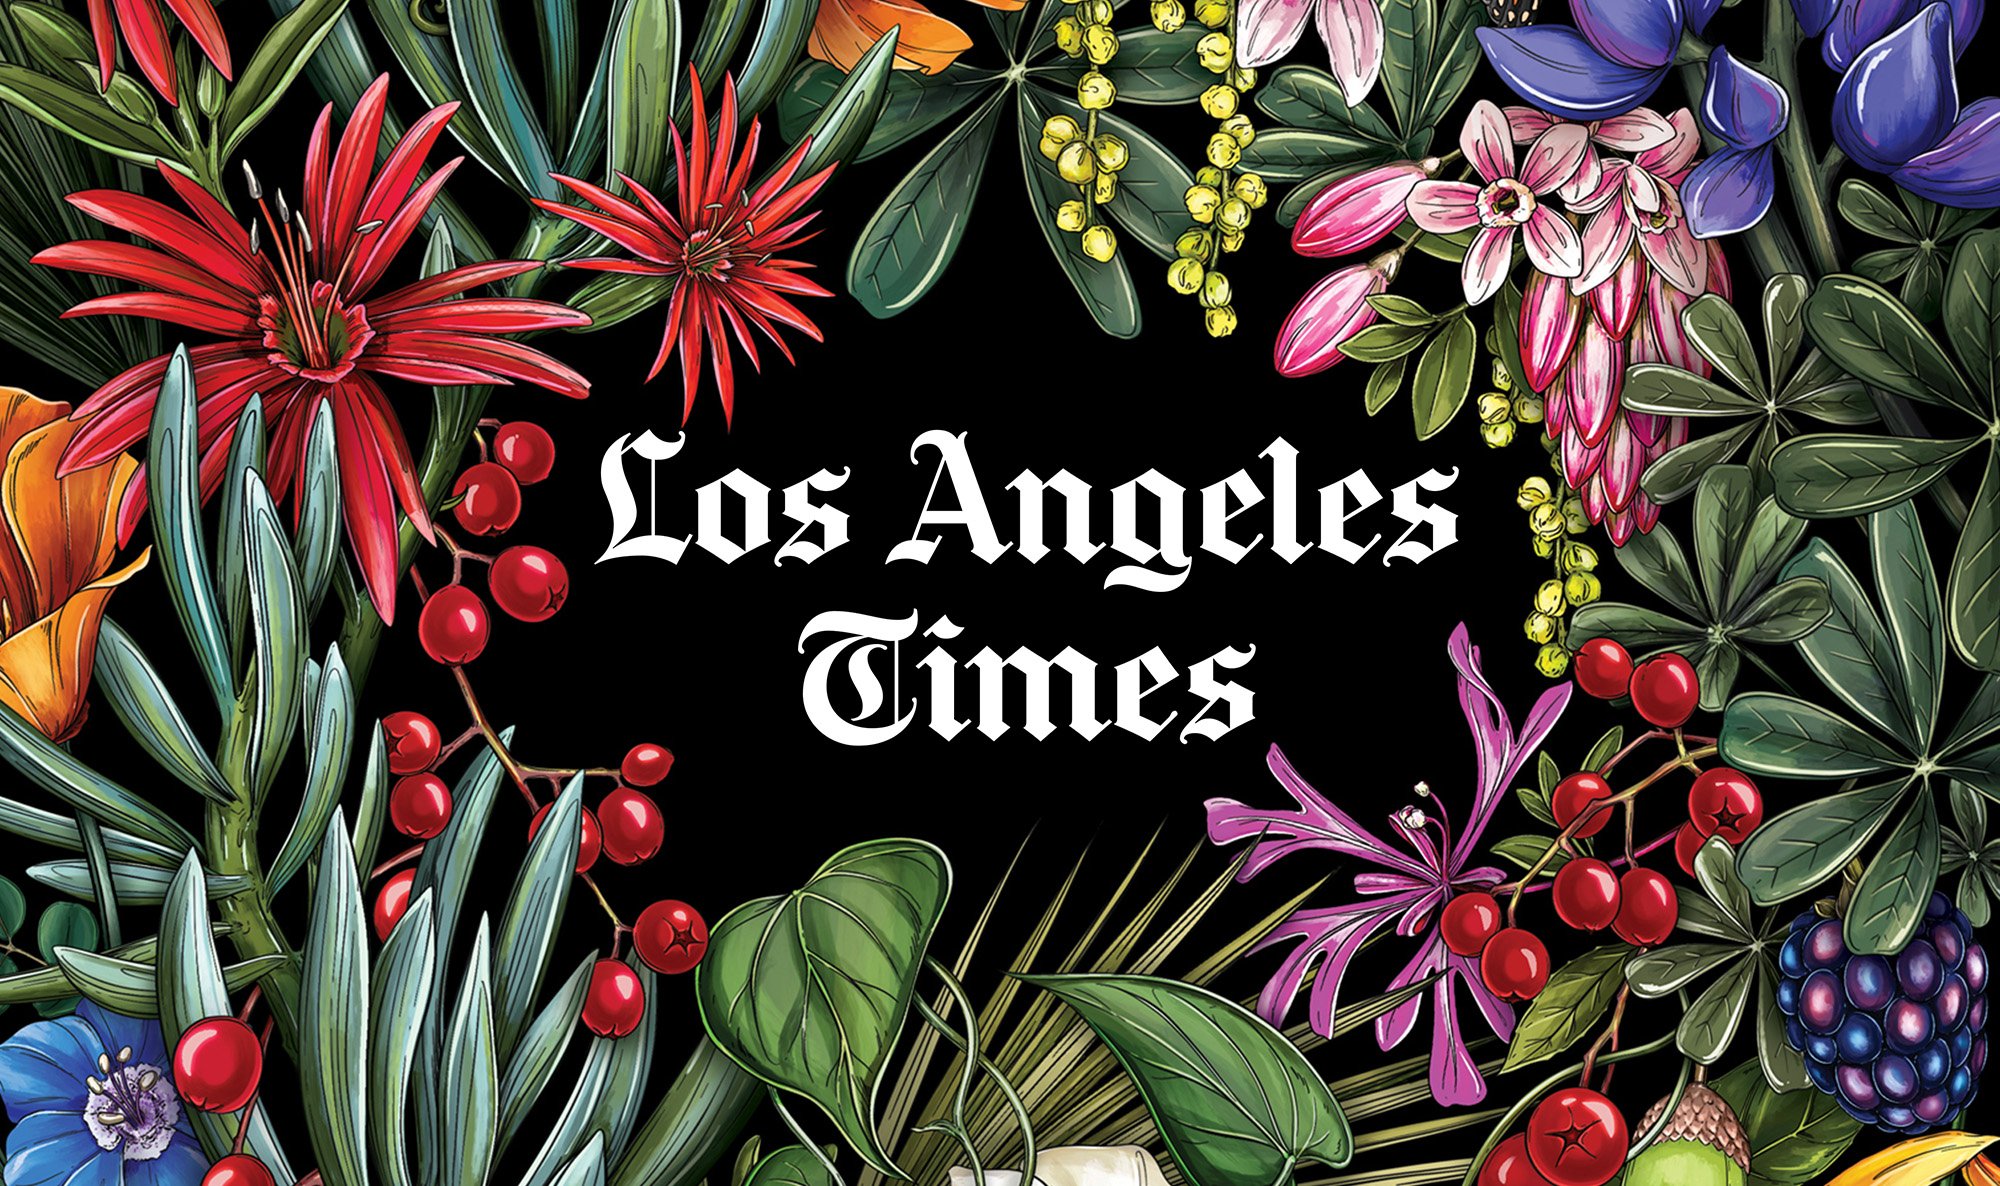 Los Angeles Times Cover Design by Maggie Enterrios